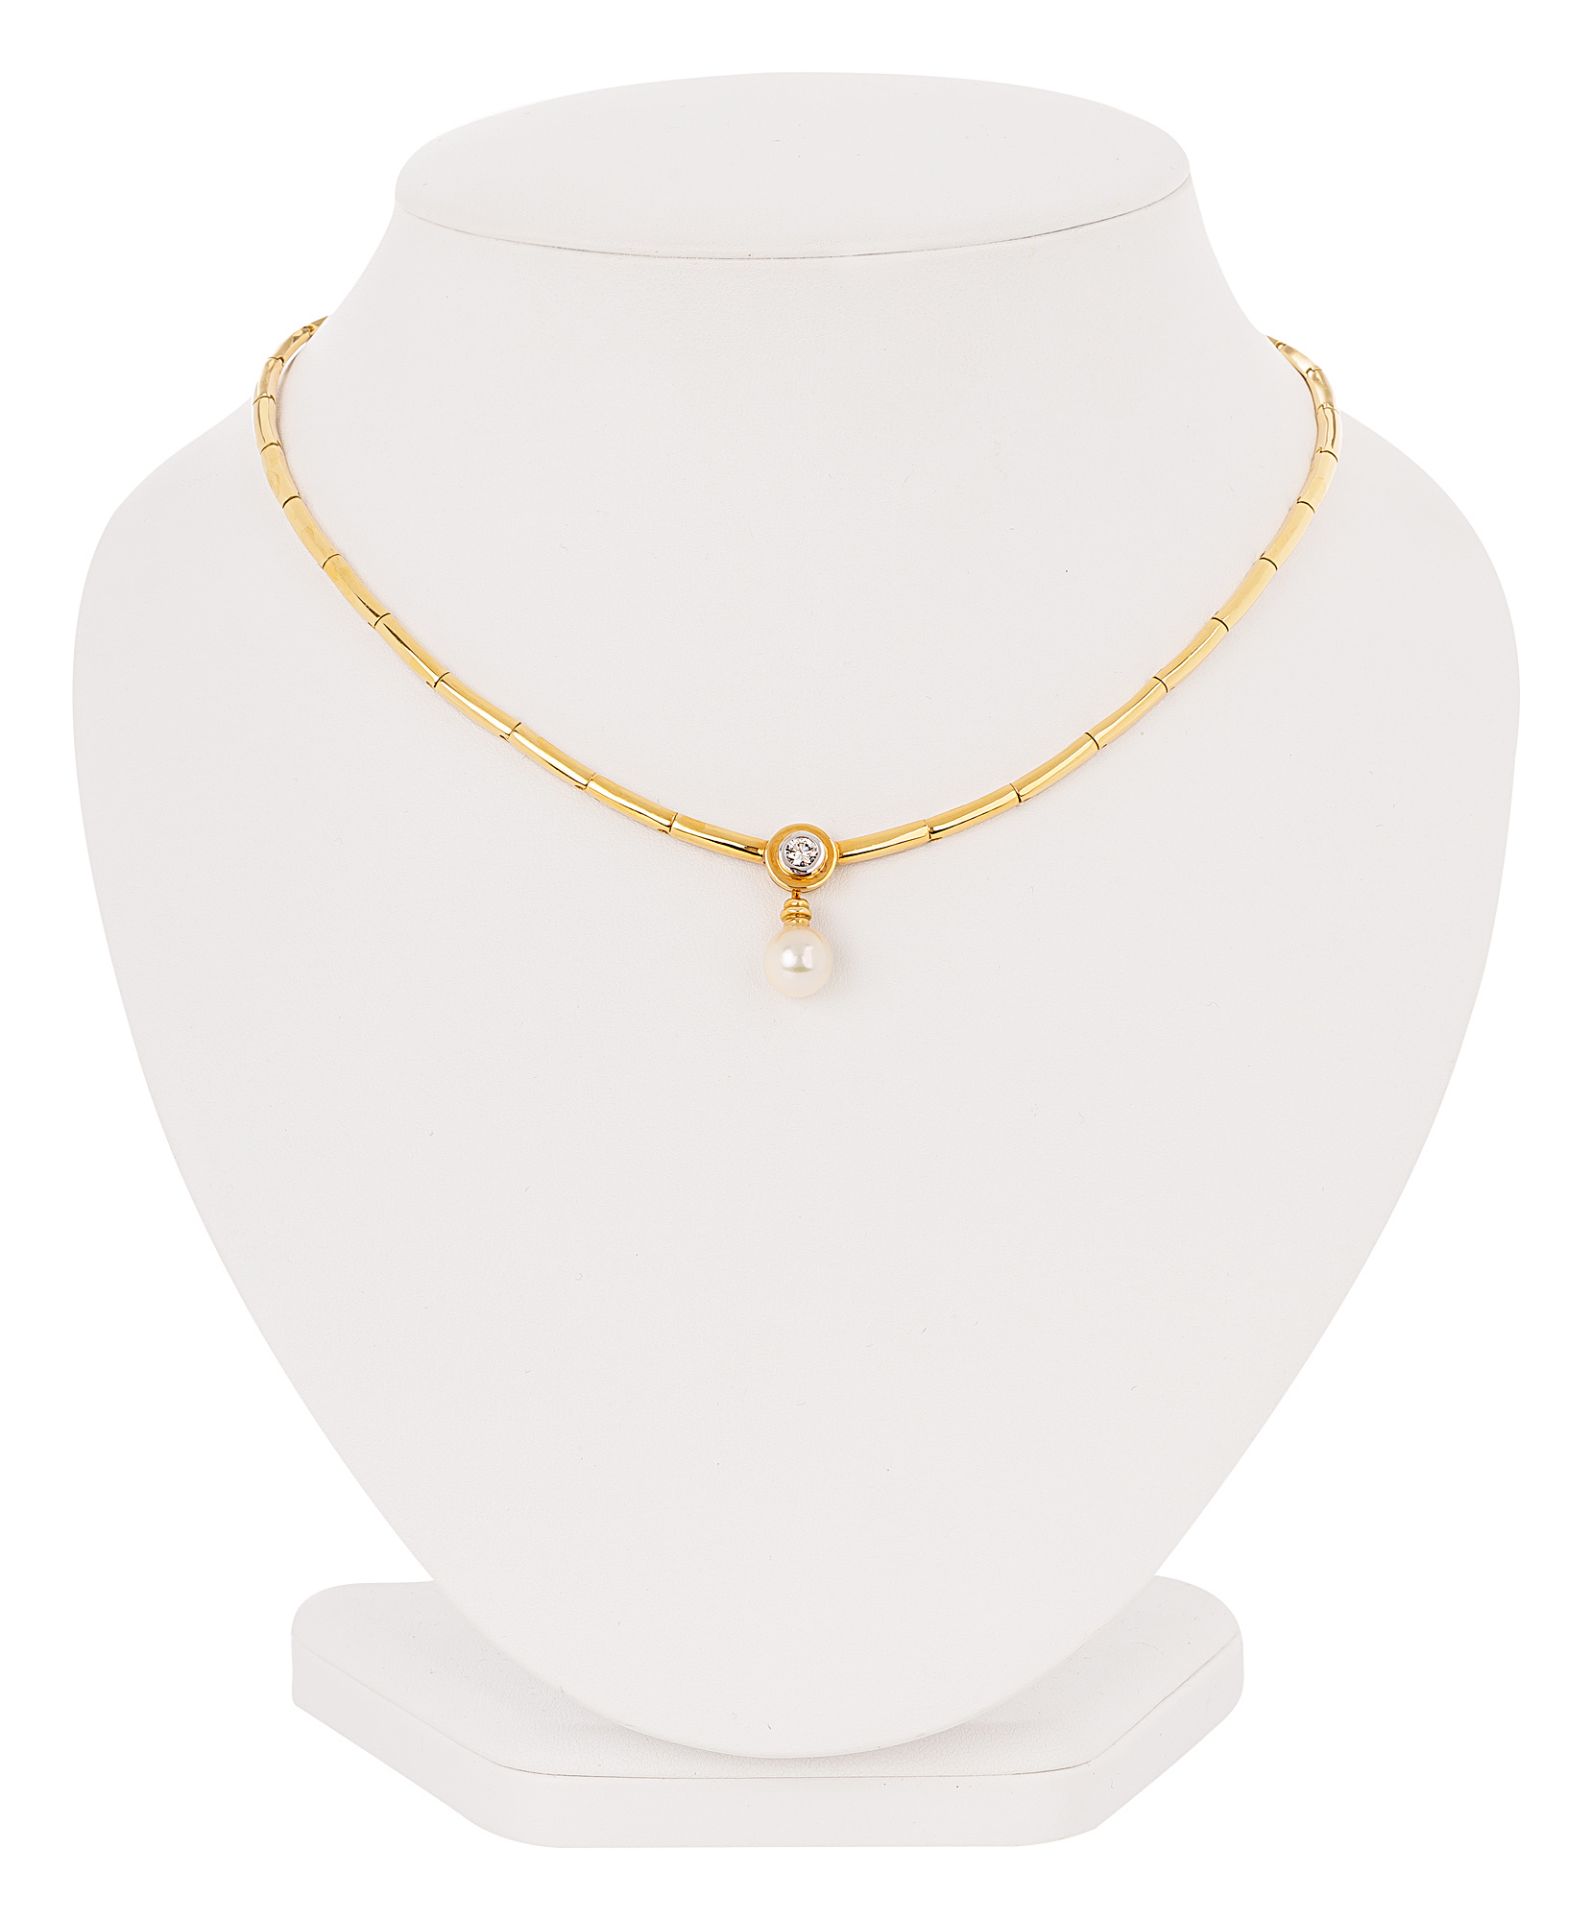 Modern necklace with solitaire diamond and pearl